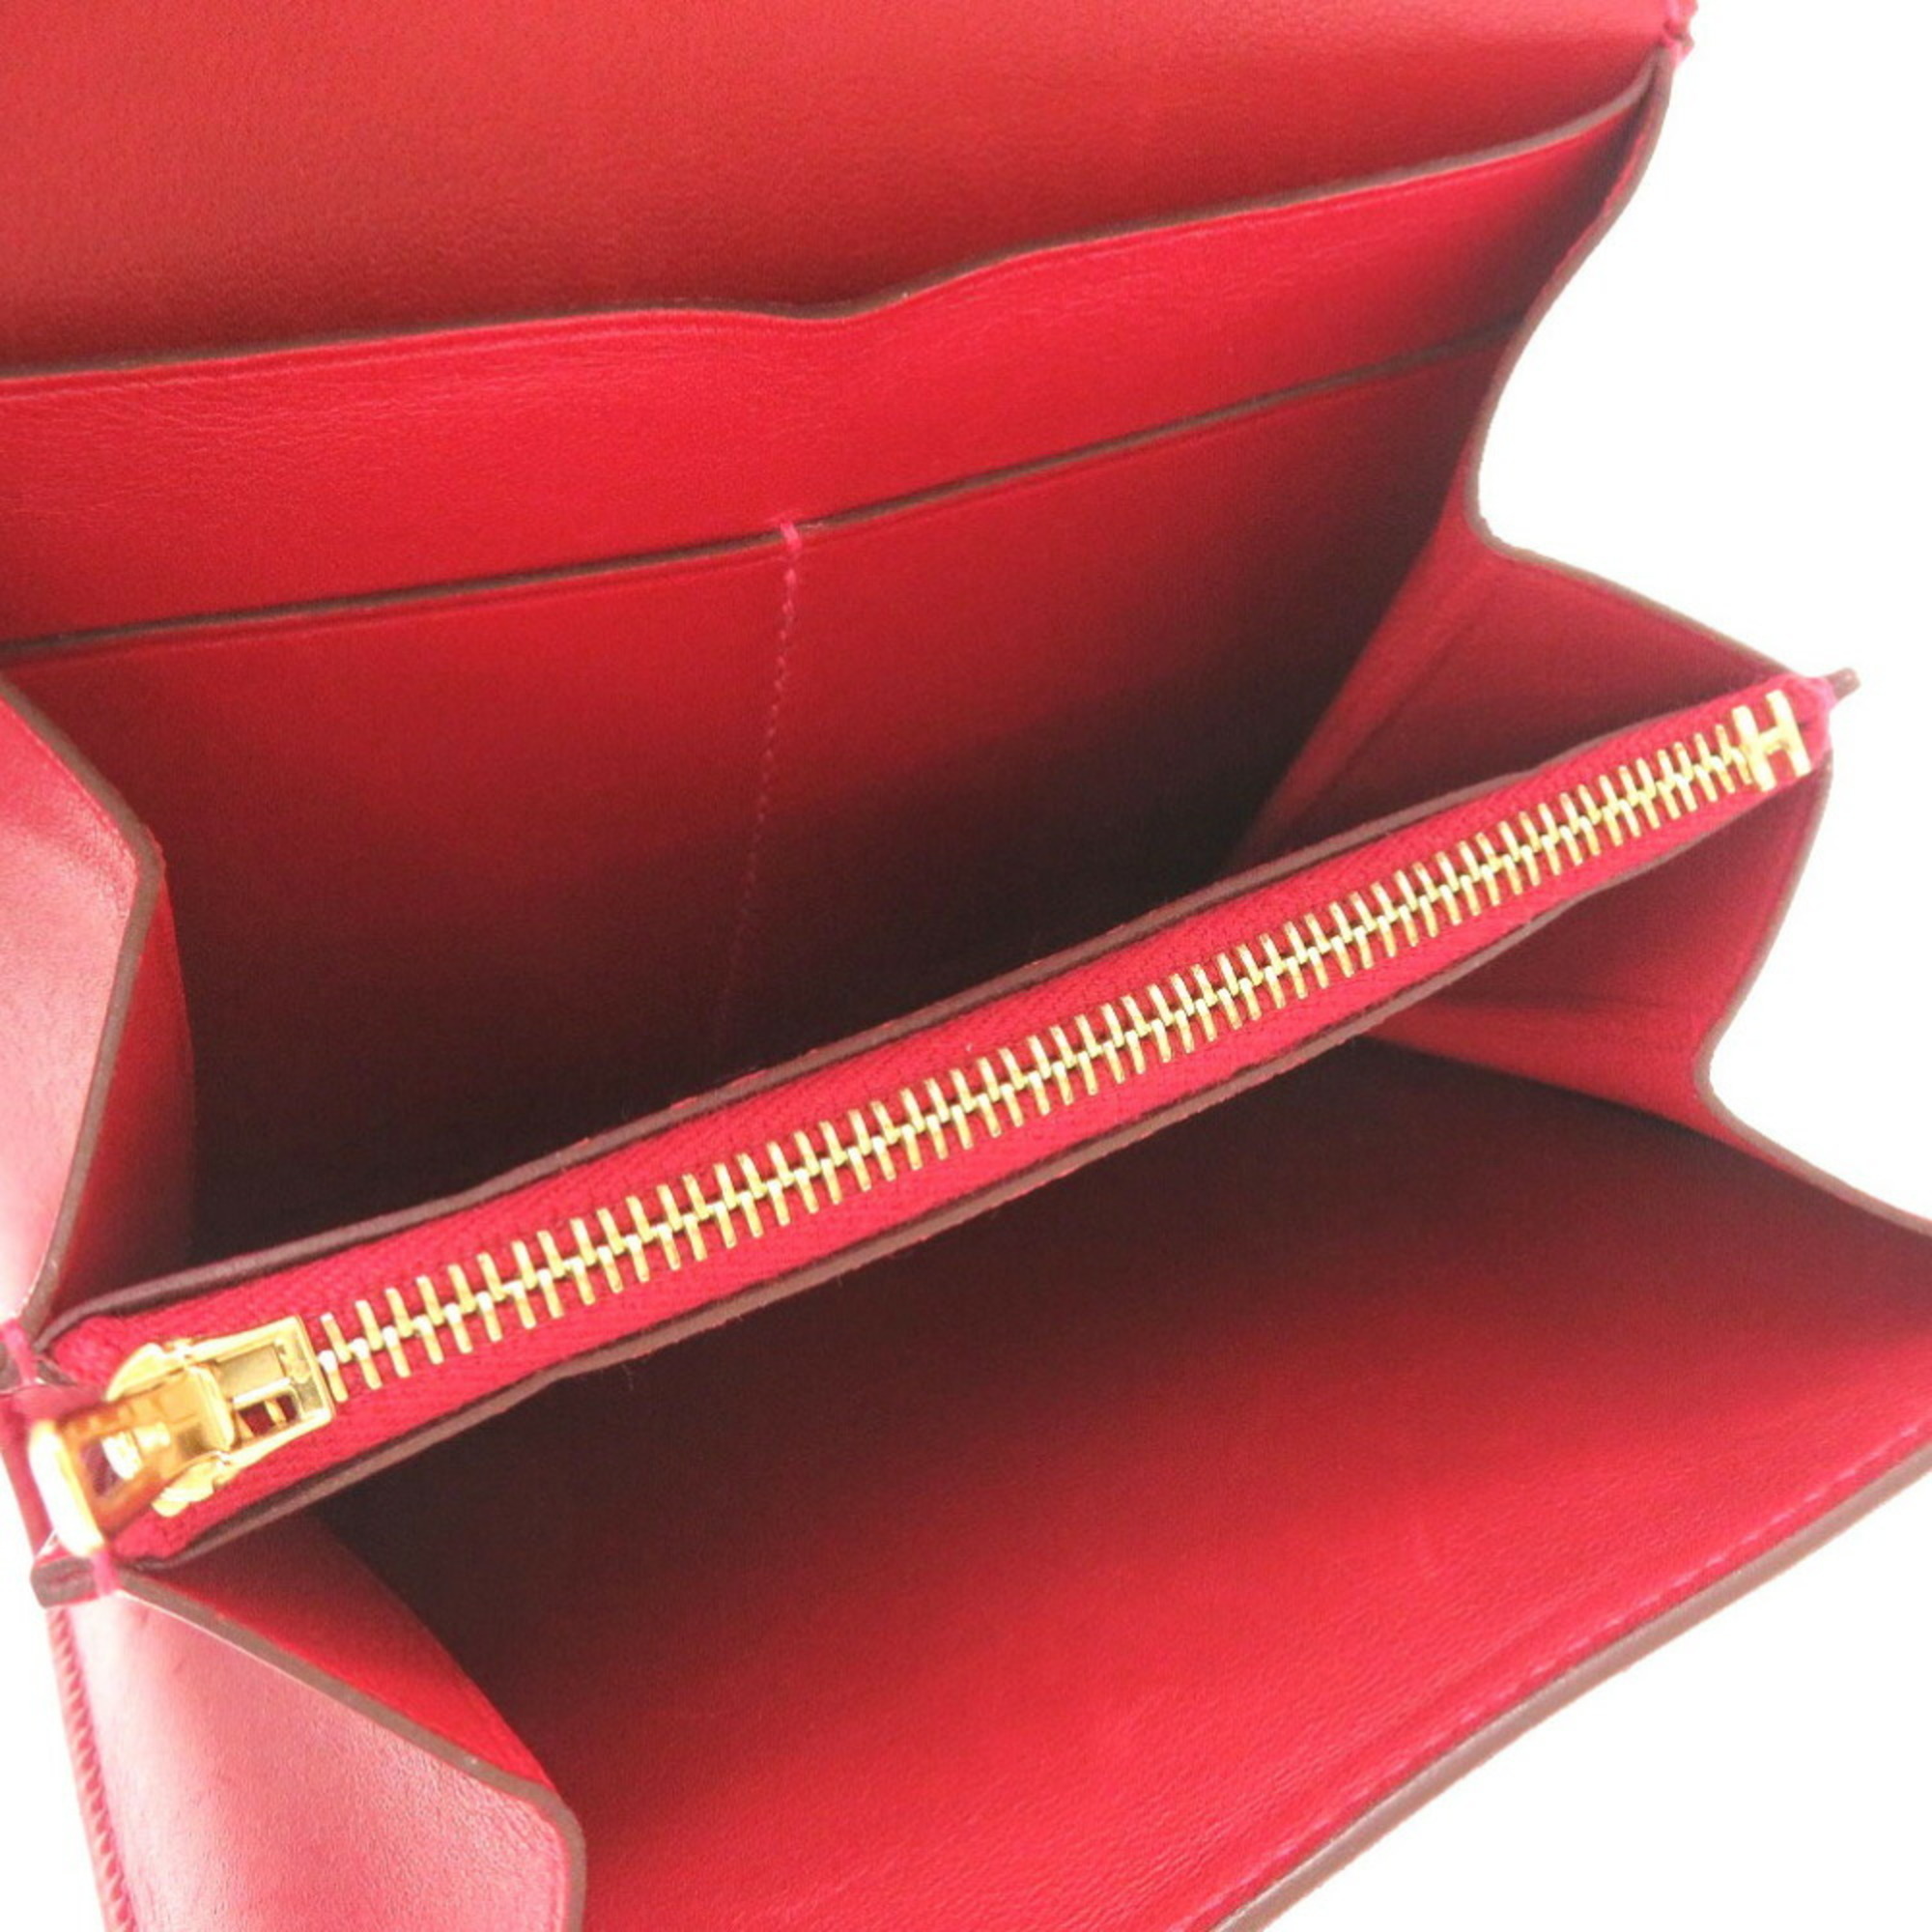 Hermes Constance Votaderact Rouge Kazak C stamped (made in 2018) wallet red